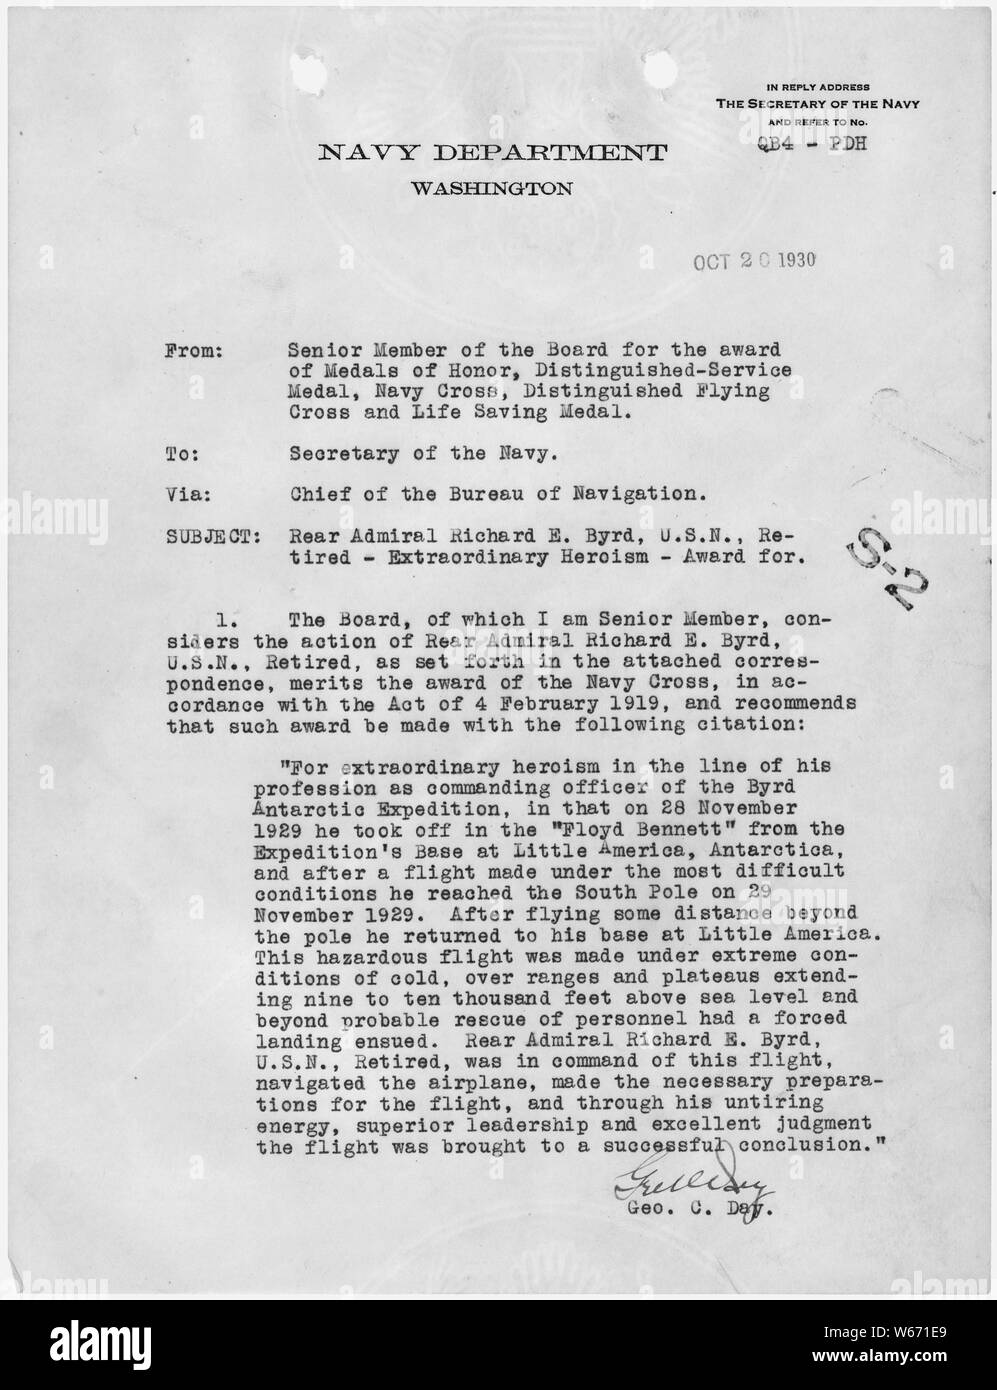 Letter from George C. Day, Senior Member of the Awards Board, to the Secretary of the Navy recommending that Rear Admiral Richard E. Byrd be awarded the Navy Cross for his first flight over the South Pole. Stock Photo